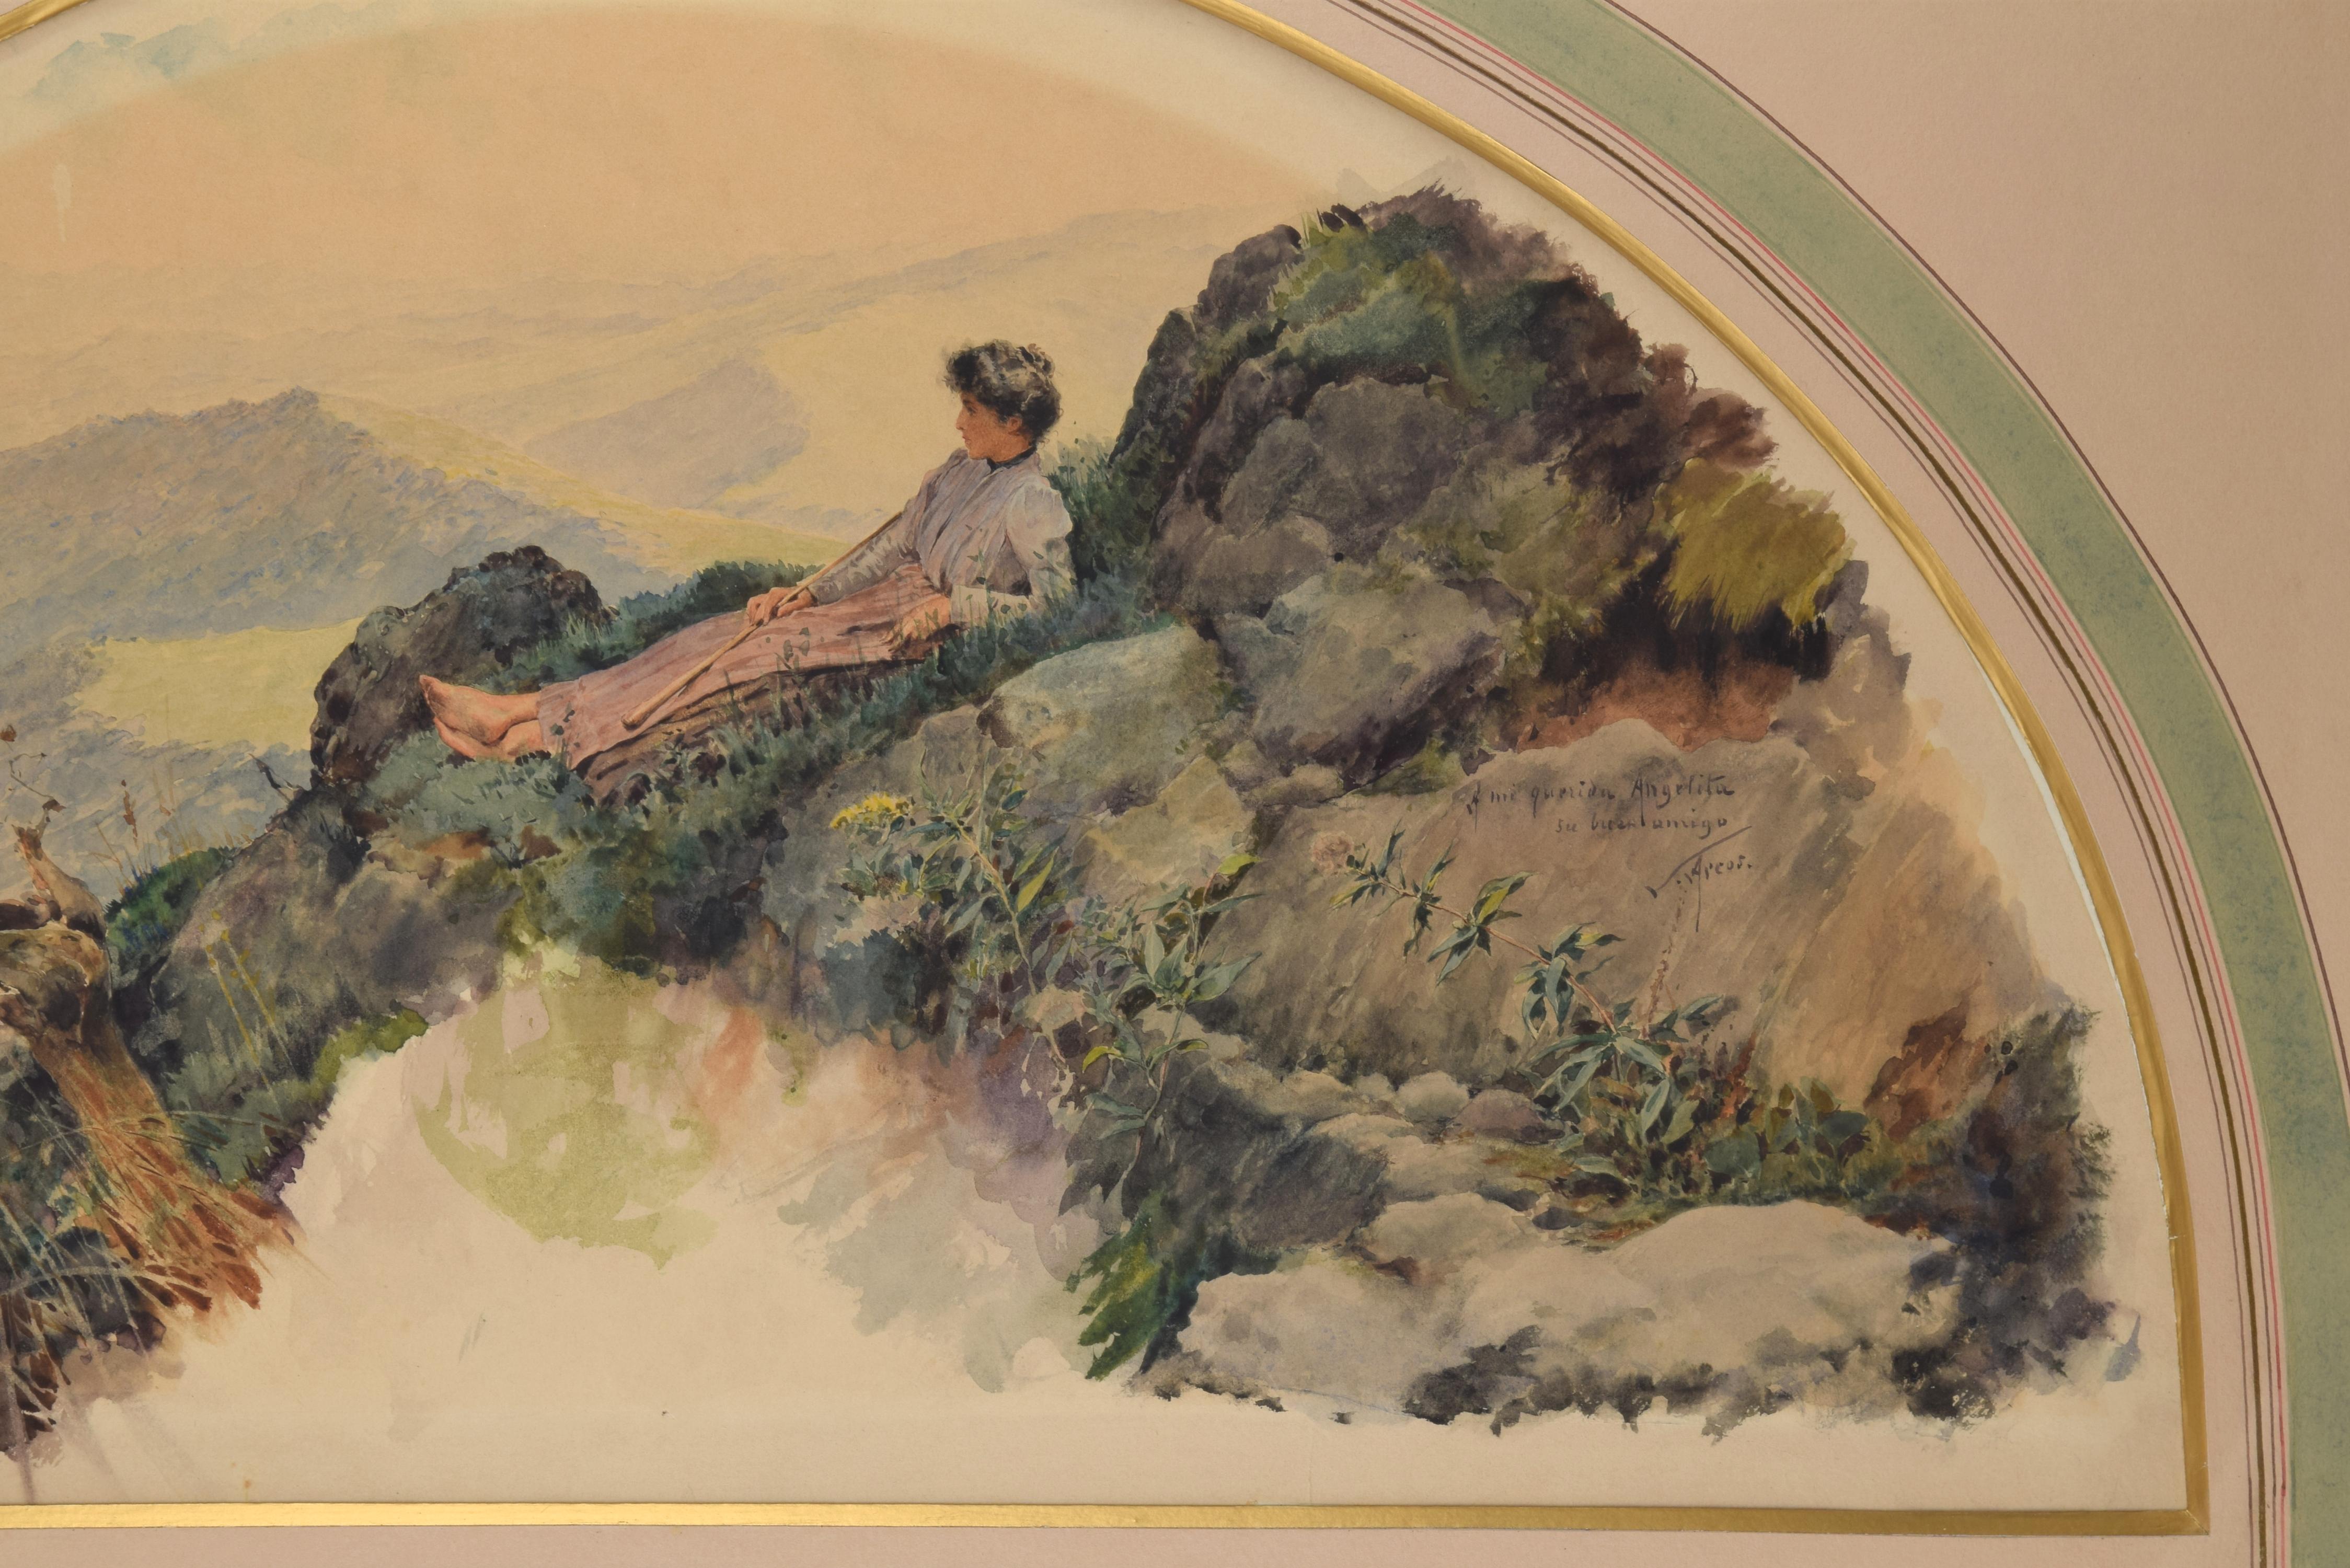 Other Lady in Landscape, Watercolor, Dedicated and Signed, Arcos Y Megalde, Santiago